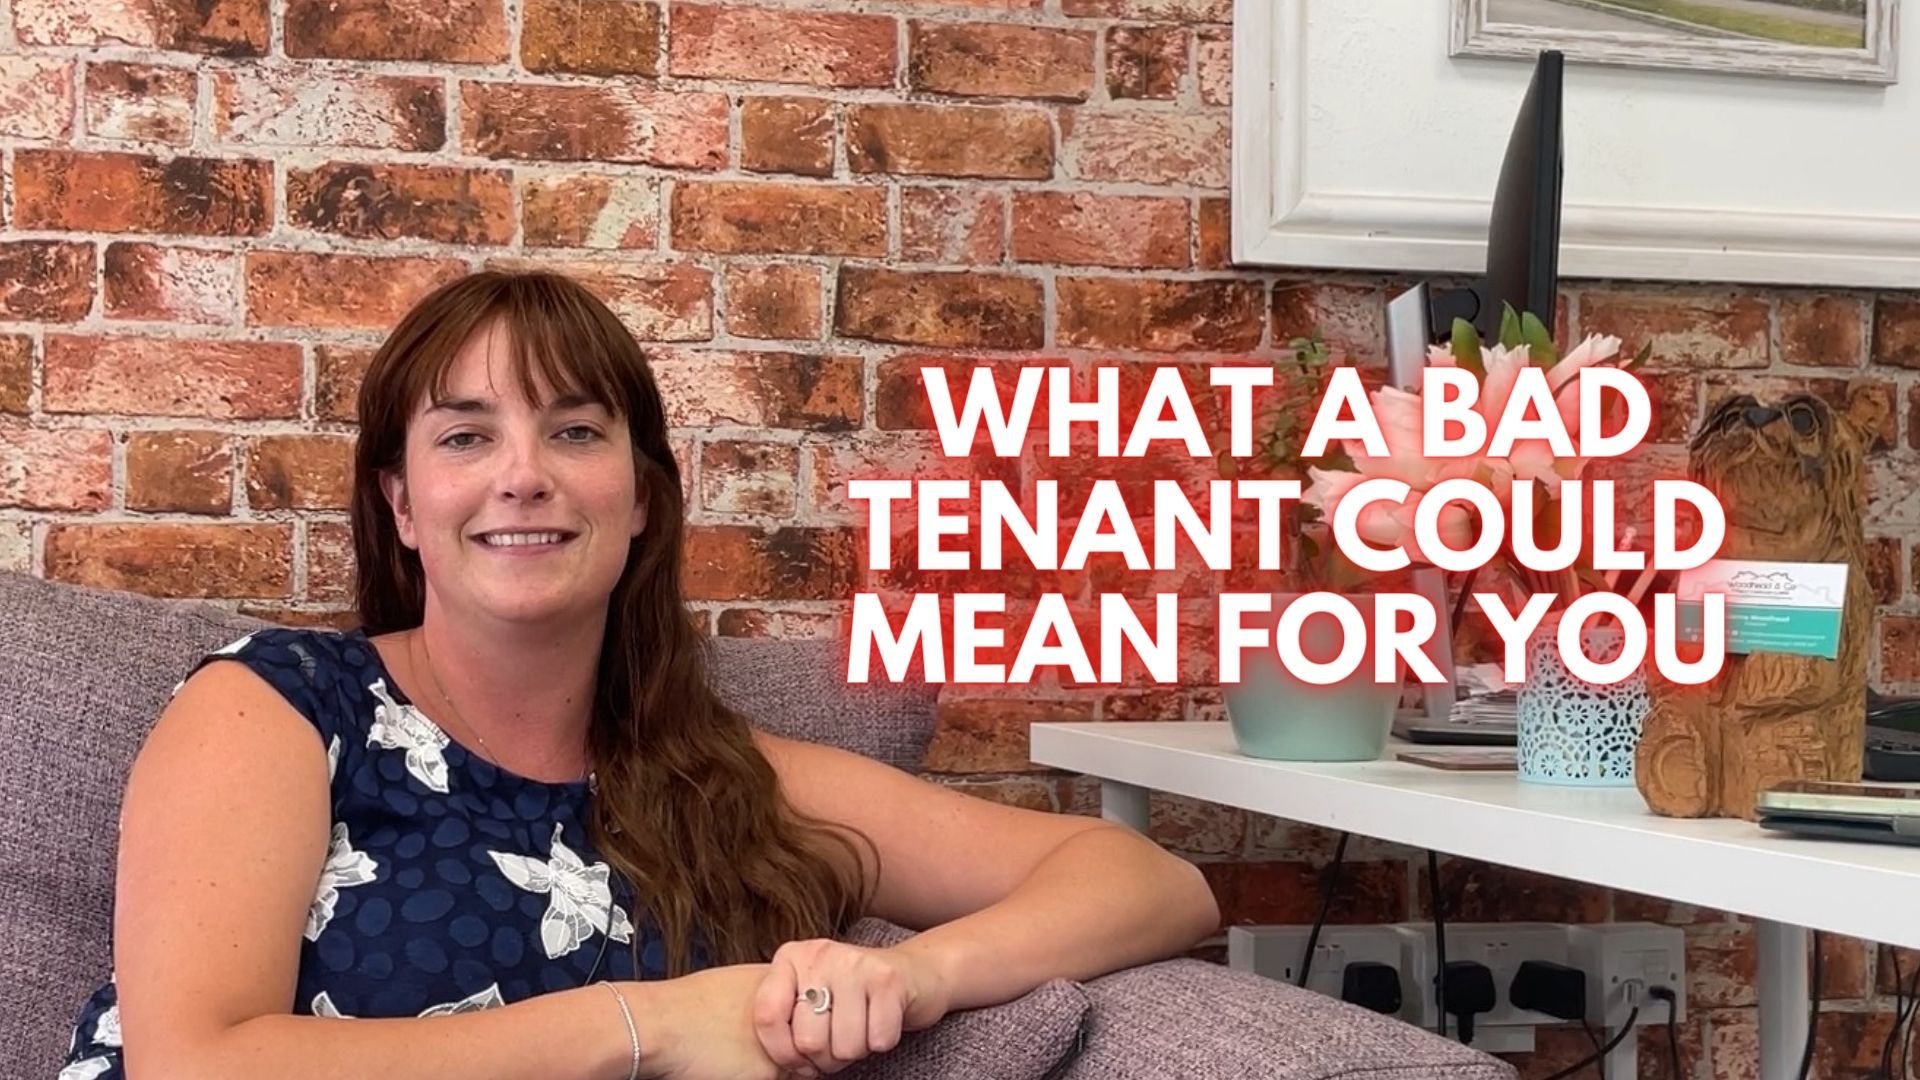 VIDEO: What A Bad Tenant Could Mean For You